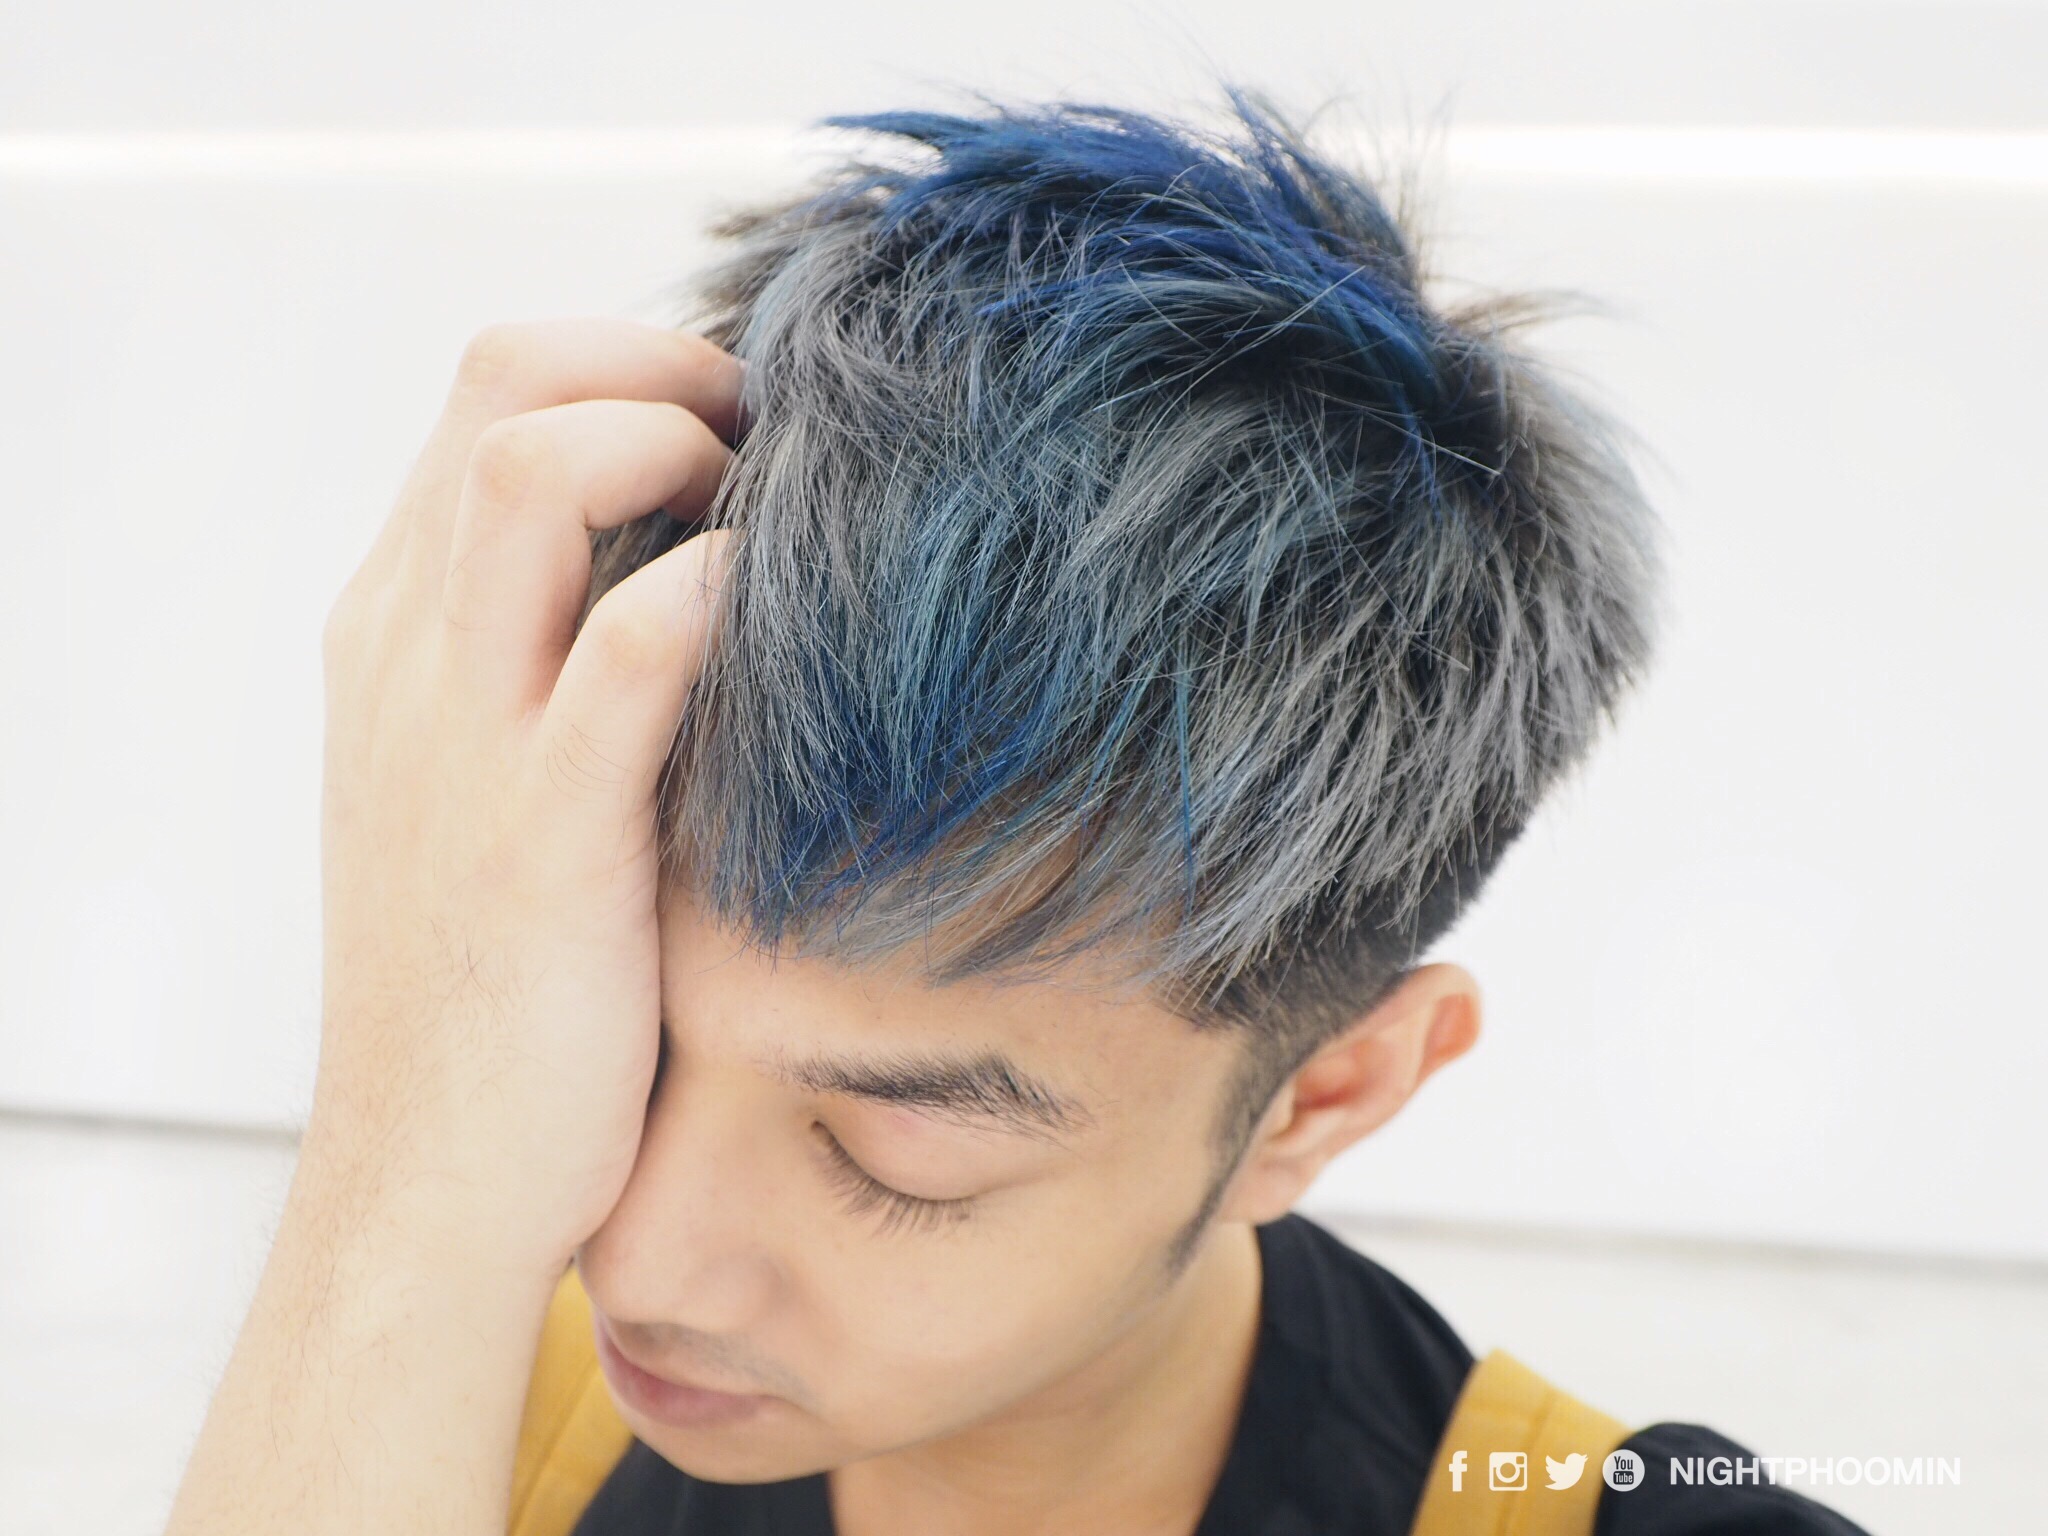 2. "How to Achieve Icy Blue Silver Blue Hair at Home" - wide 11